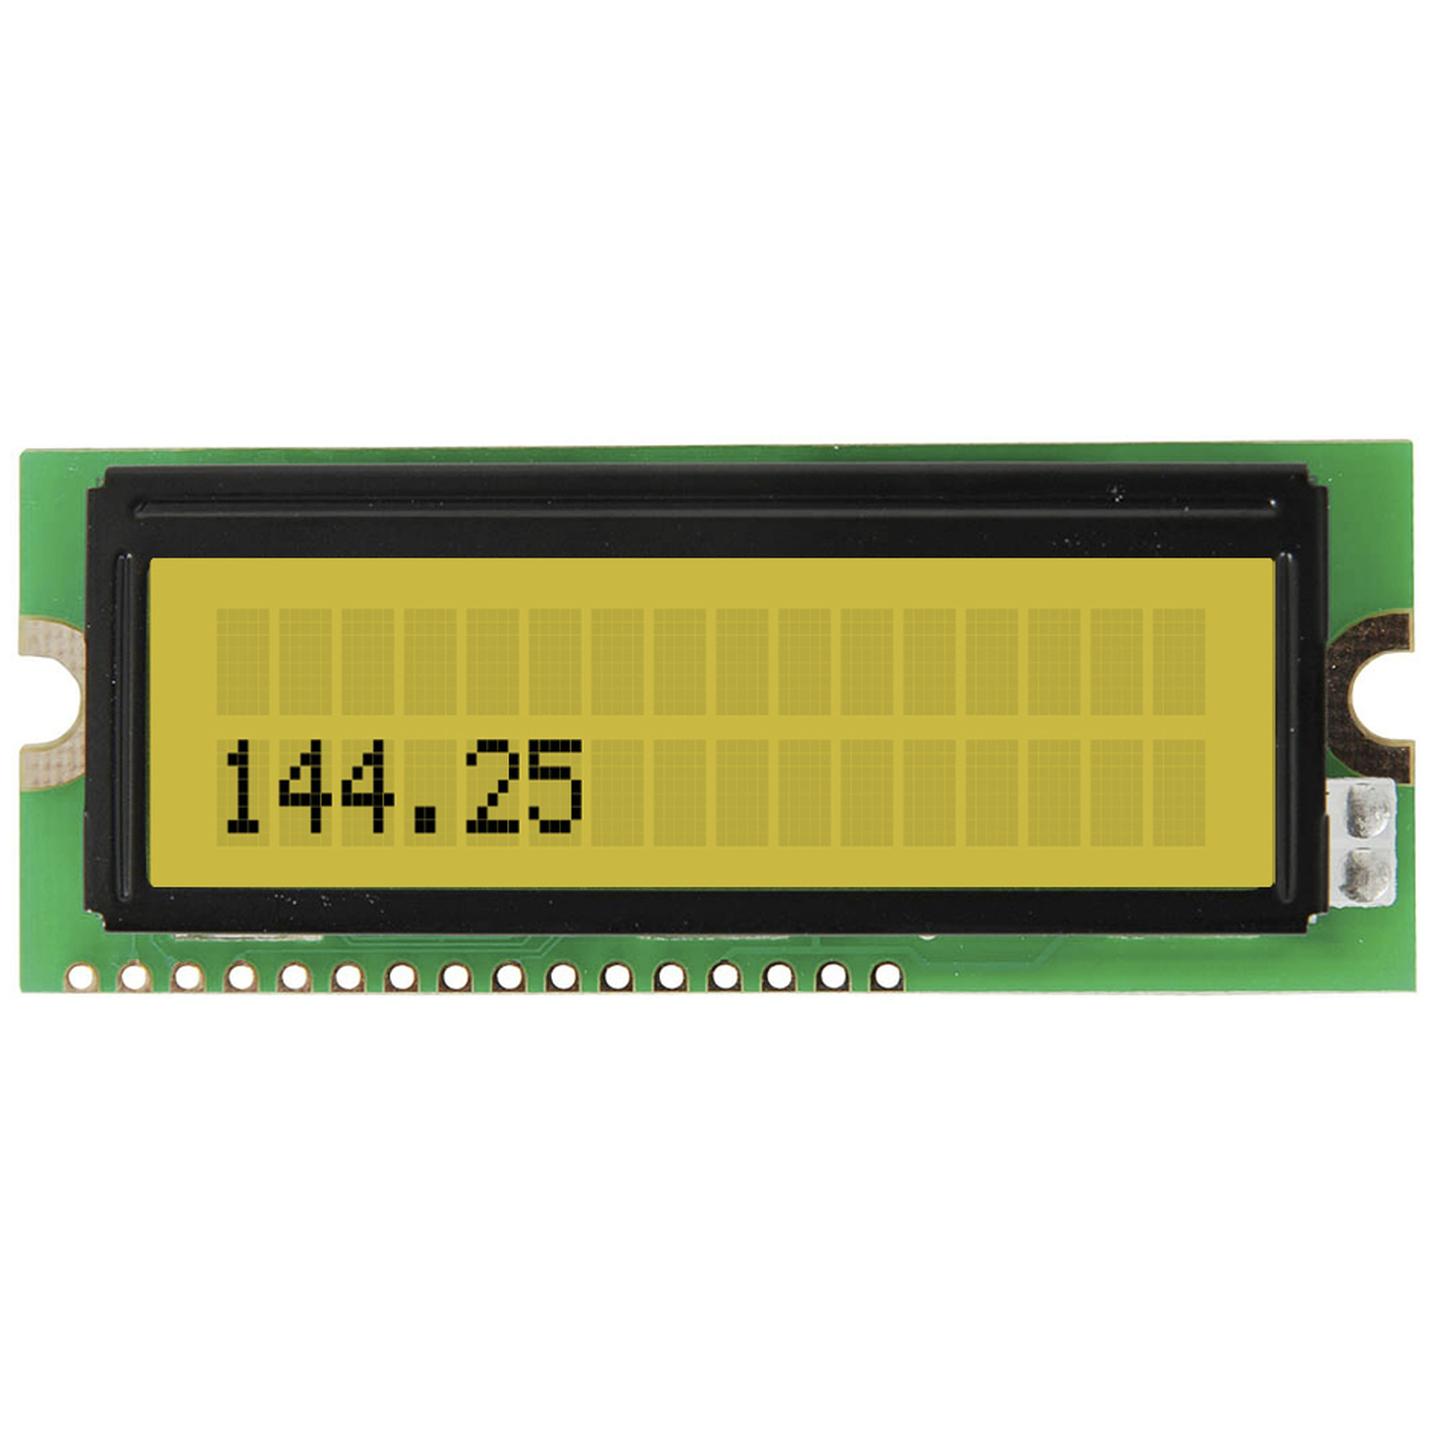 16 x 2 Alphanumeric Backlit LCD with SIL Connection